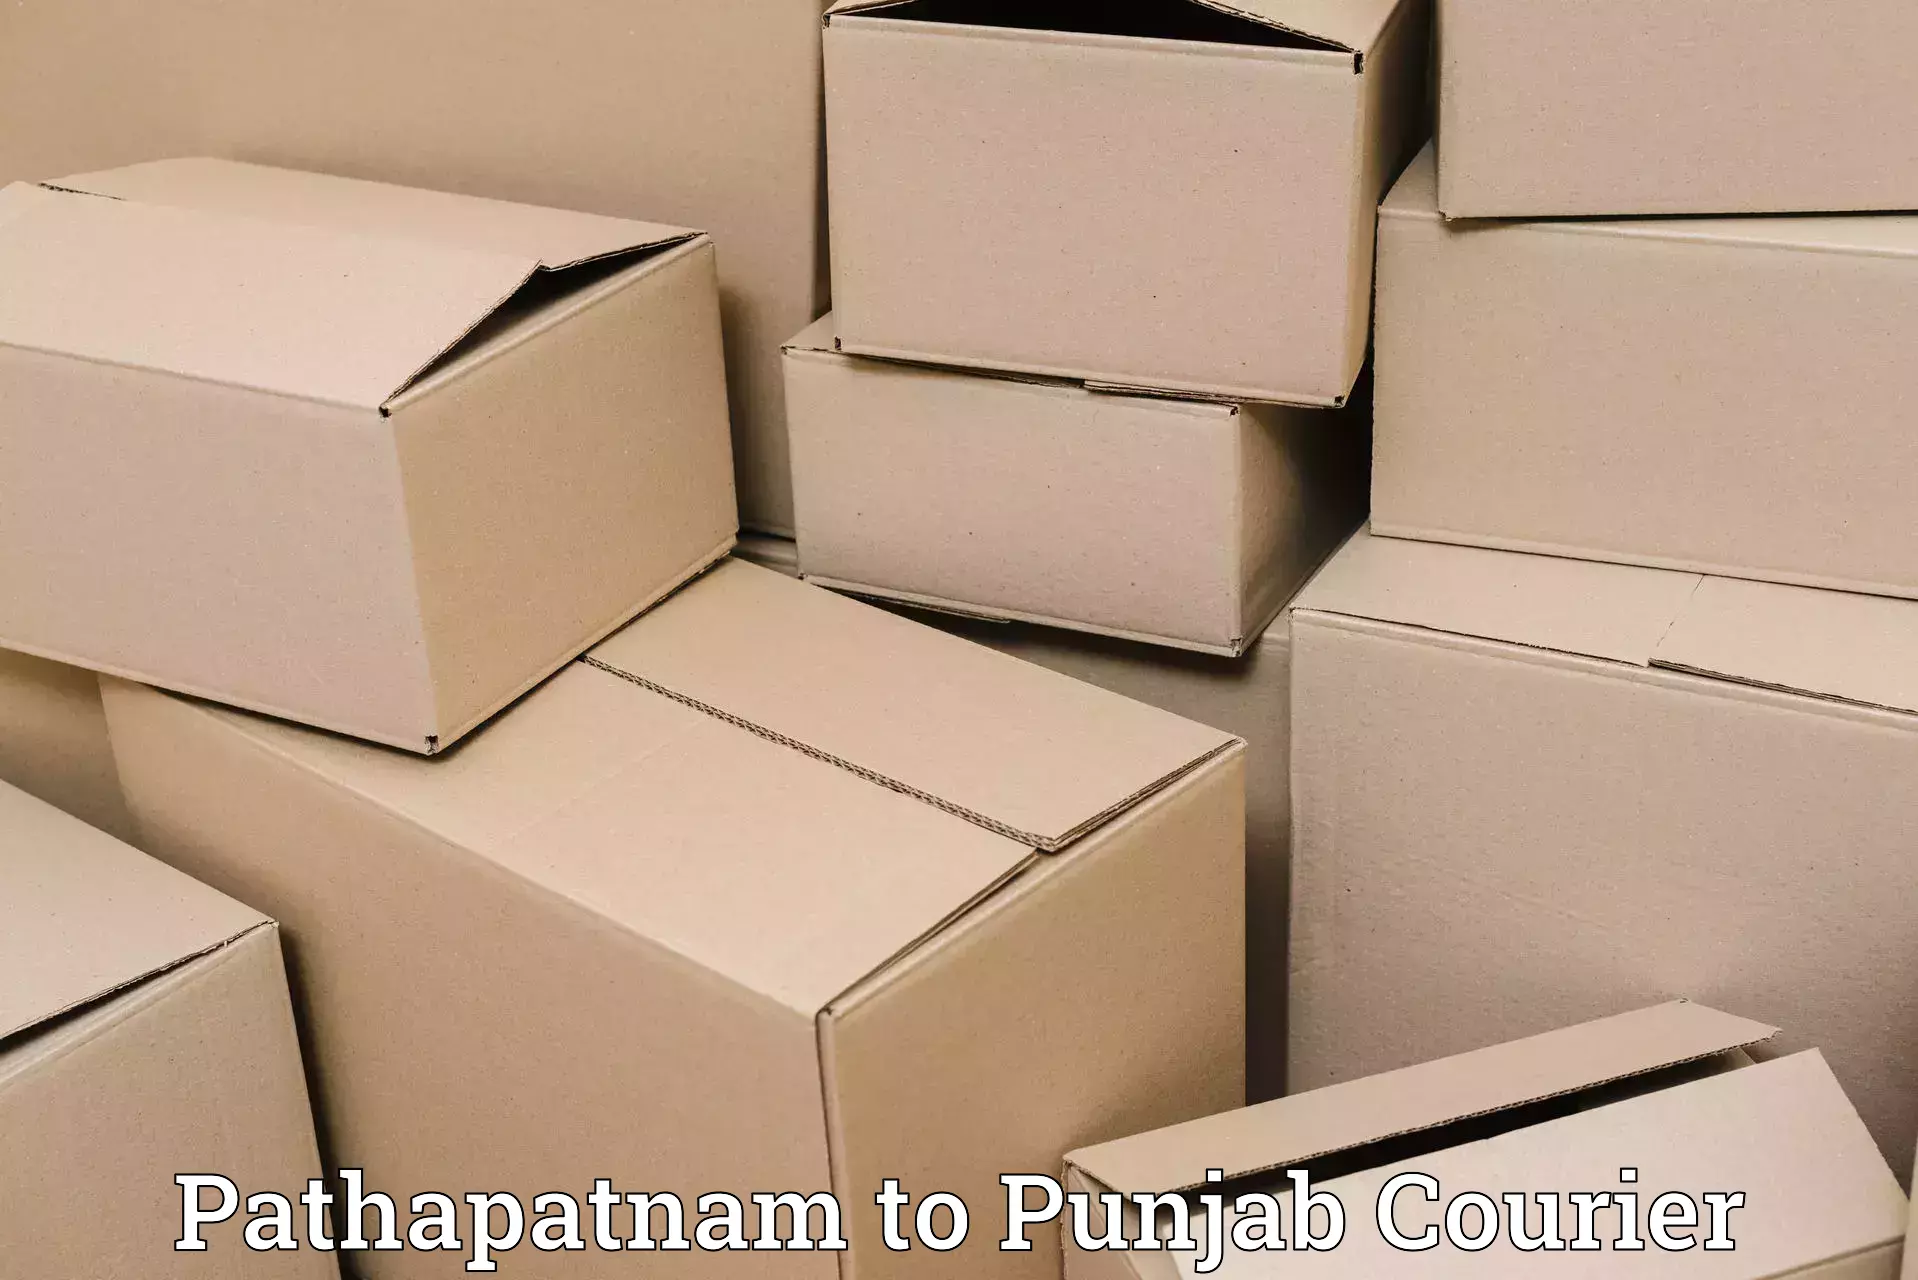 Global shipping networks Pathapatnam to Sirhind Fatehgarh